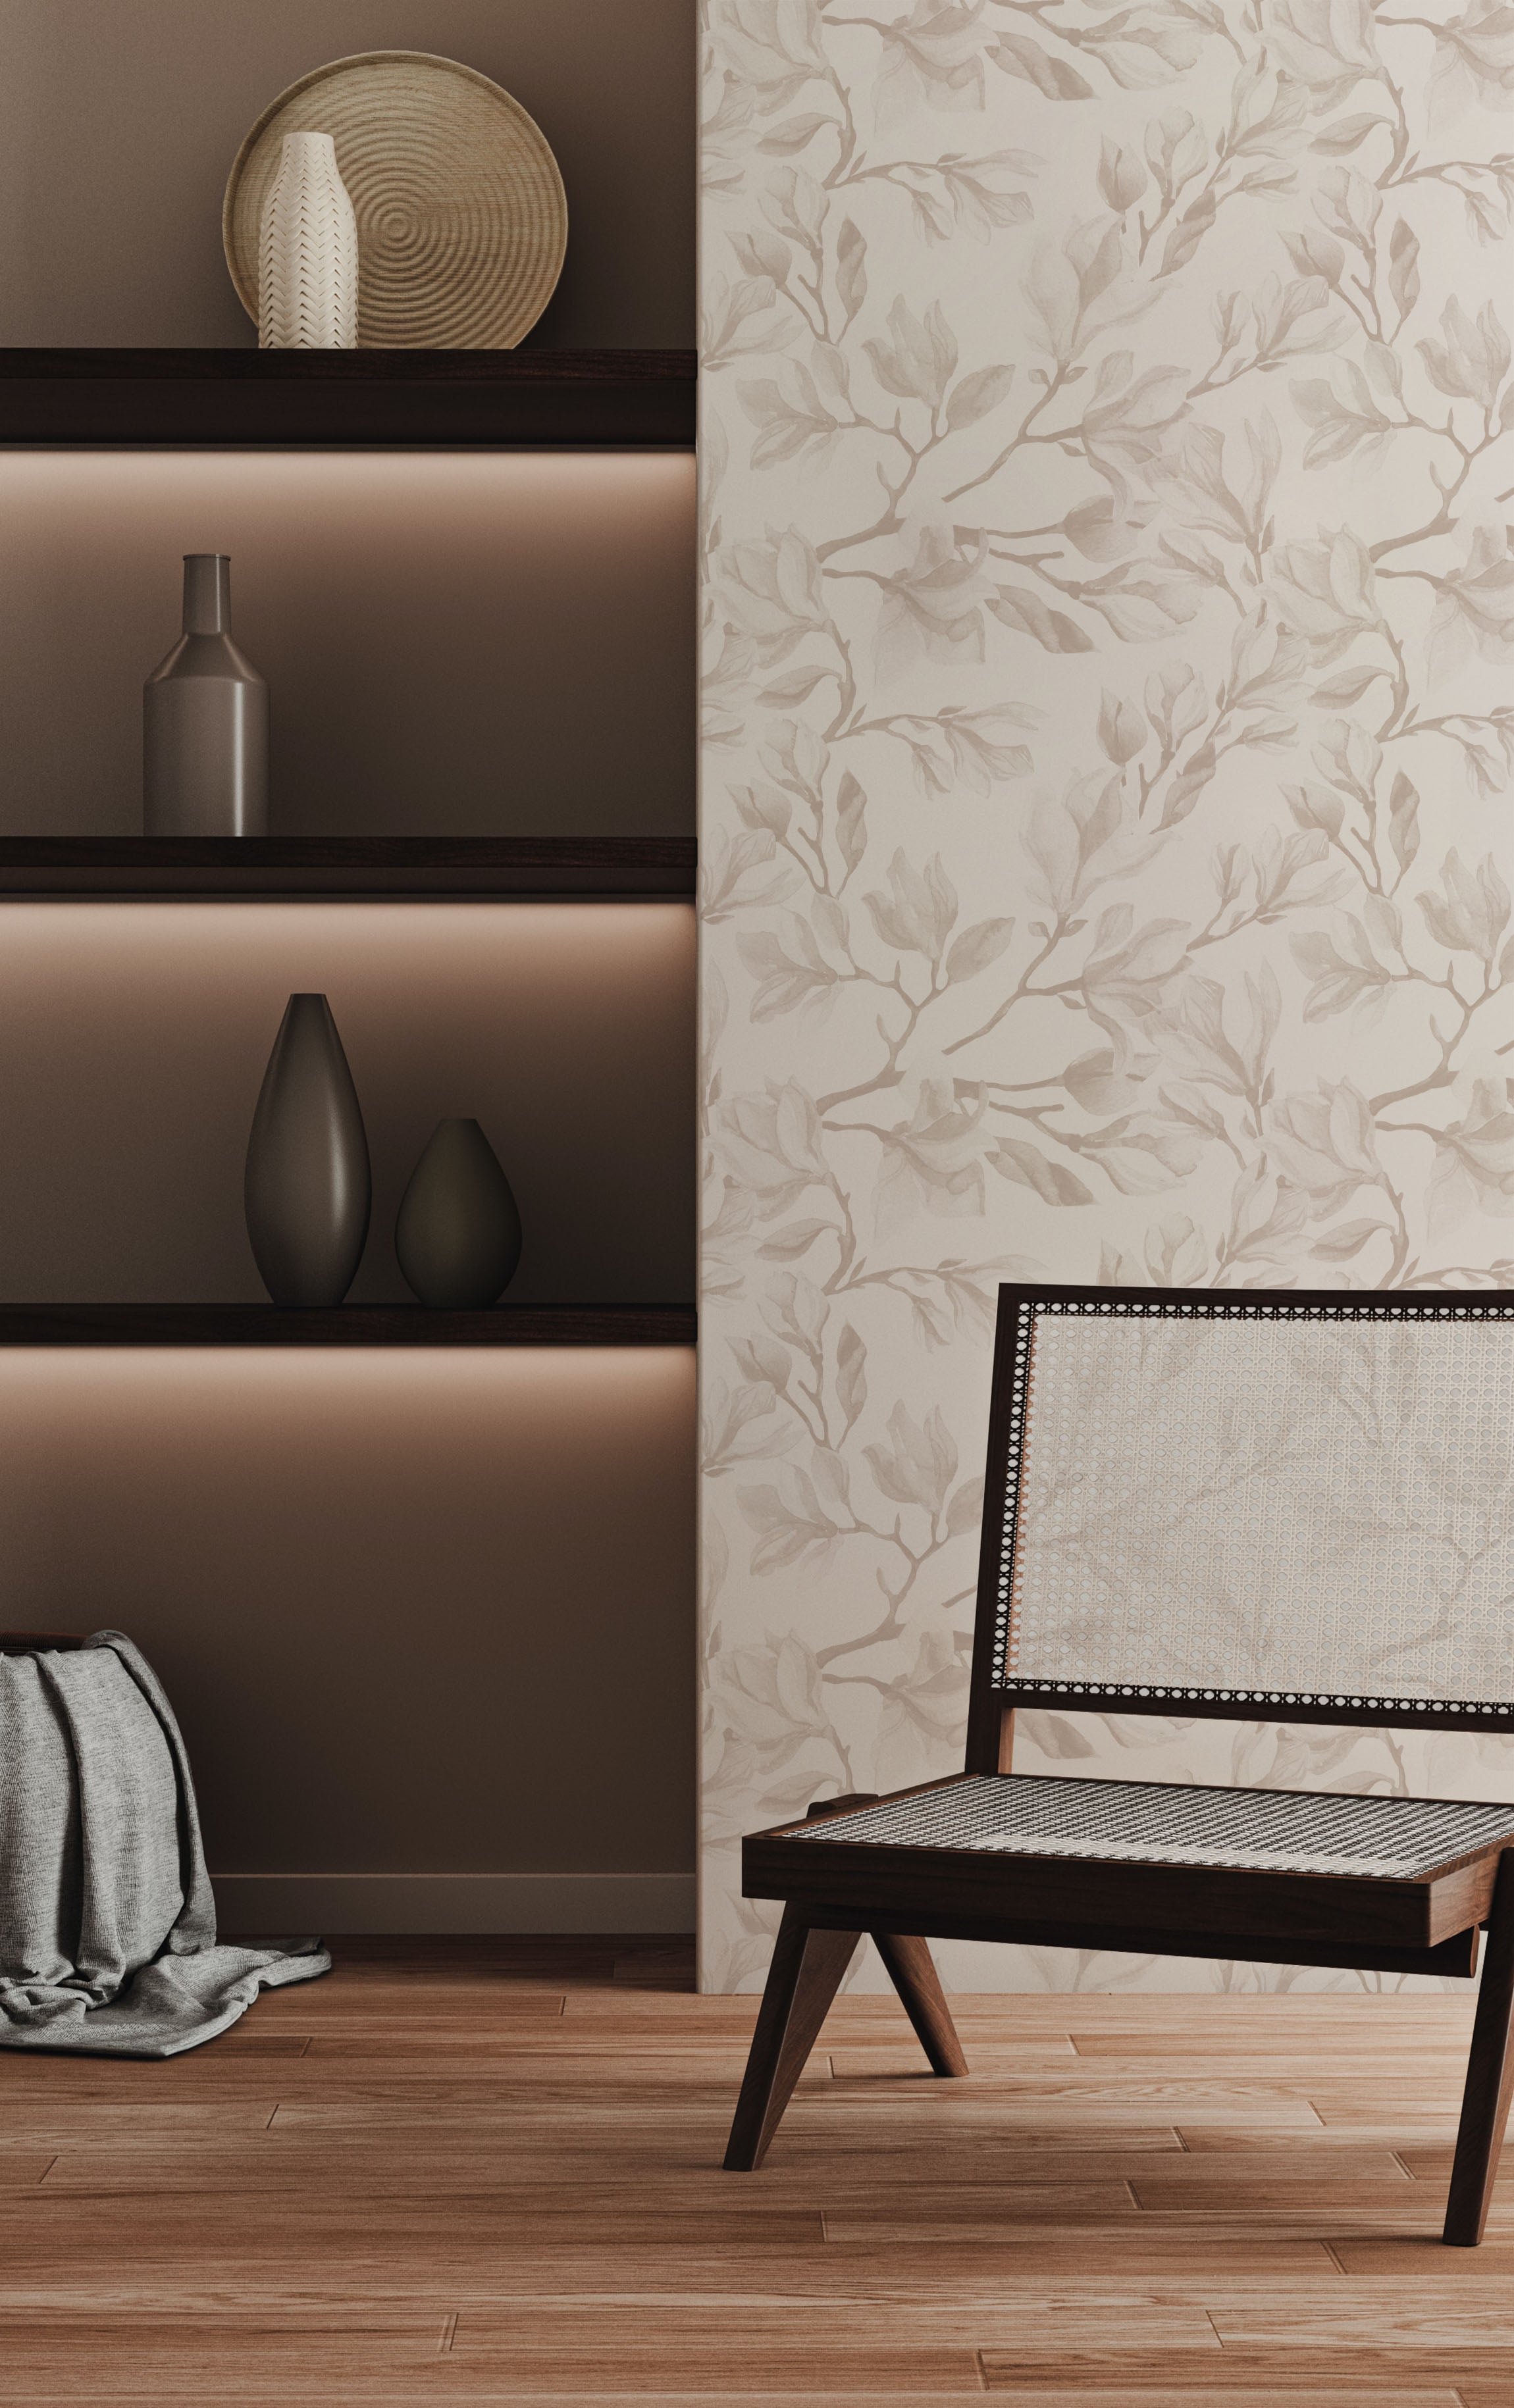 A warm and inviting corner illuminated by ambient lighting, with the 'Blooming Magnolia Wallpaper' adorning the wall and adding a botanical sophistication next to a dark wooden chair and minimalist shelf decor.